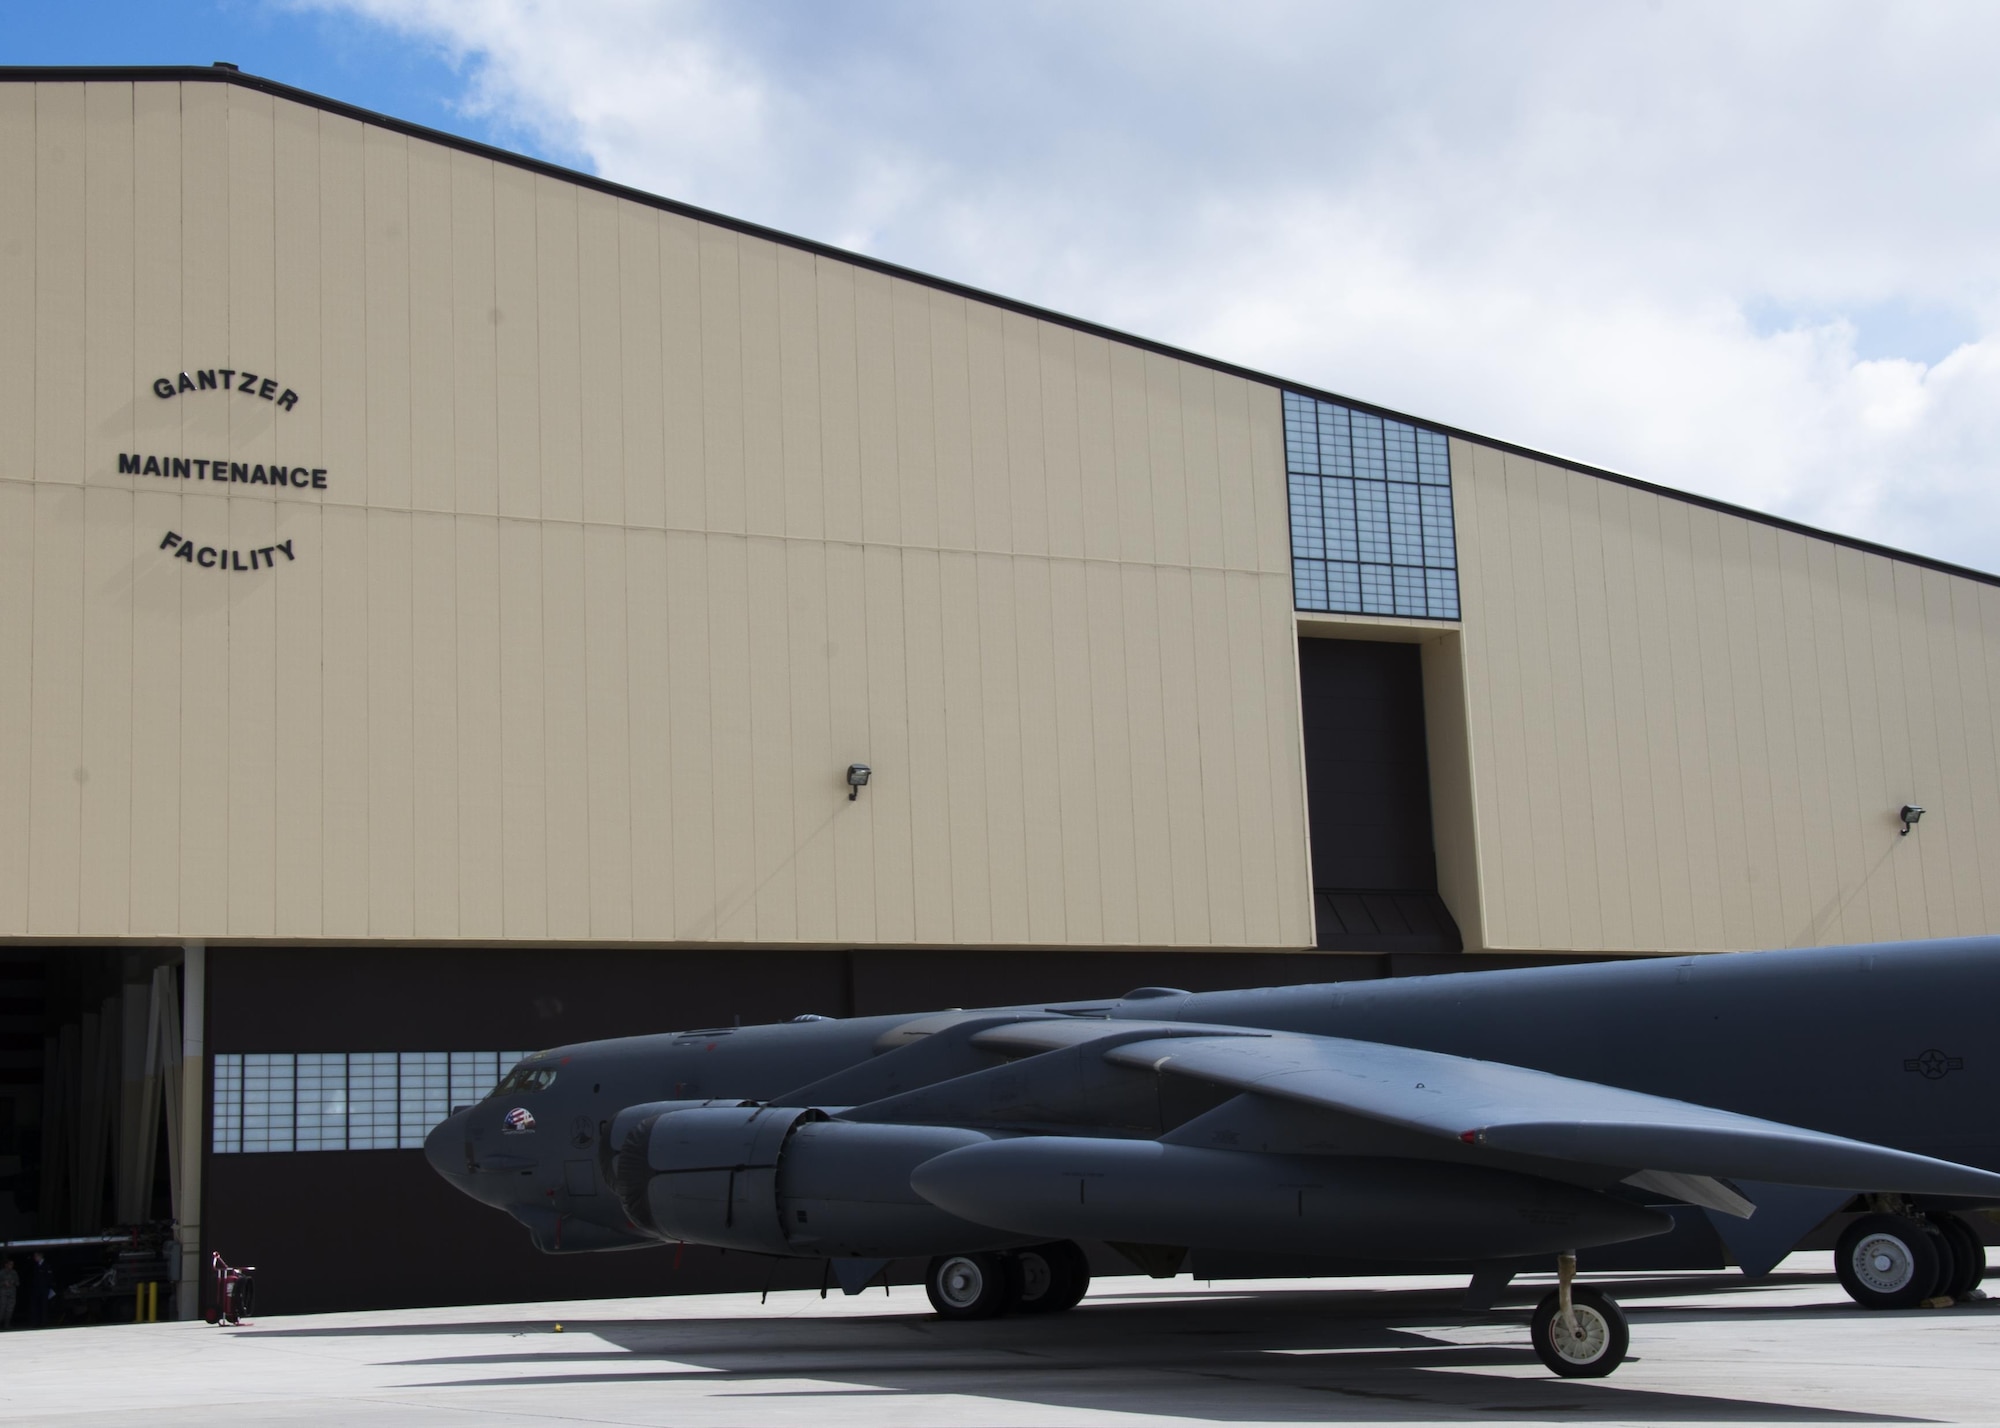 A B-52H Stratofortress sits outside of the Gantzer Maintenance Facility at Minot Air Force Base, N.D., April 21, 2017. Previously Dock 8, the hangar was renamed in honor of Chief Master Sgt. Fredrick Gantzer, an Airman who served for 31 years with over a decade at Minot AFB. (U.S. Air Force photo/Airman 1st Class Alyssa M. Akers)